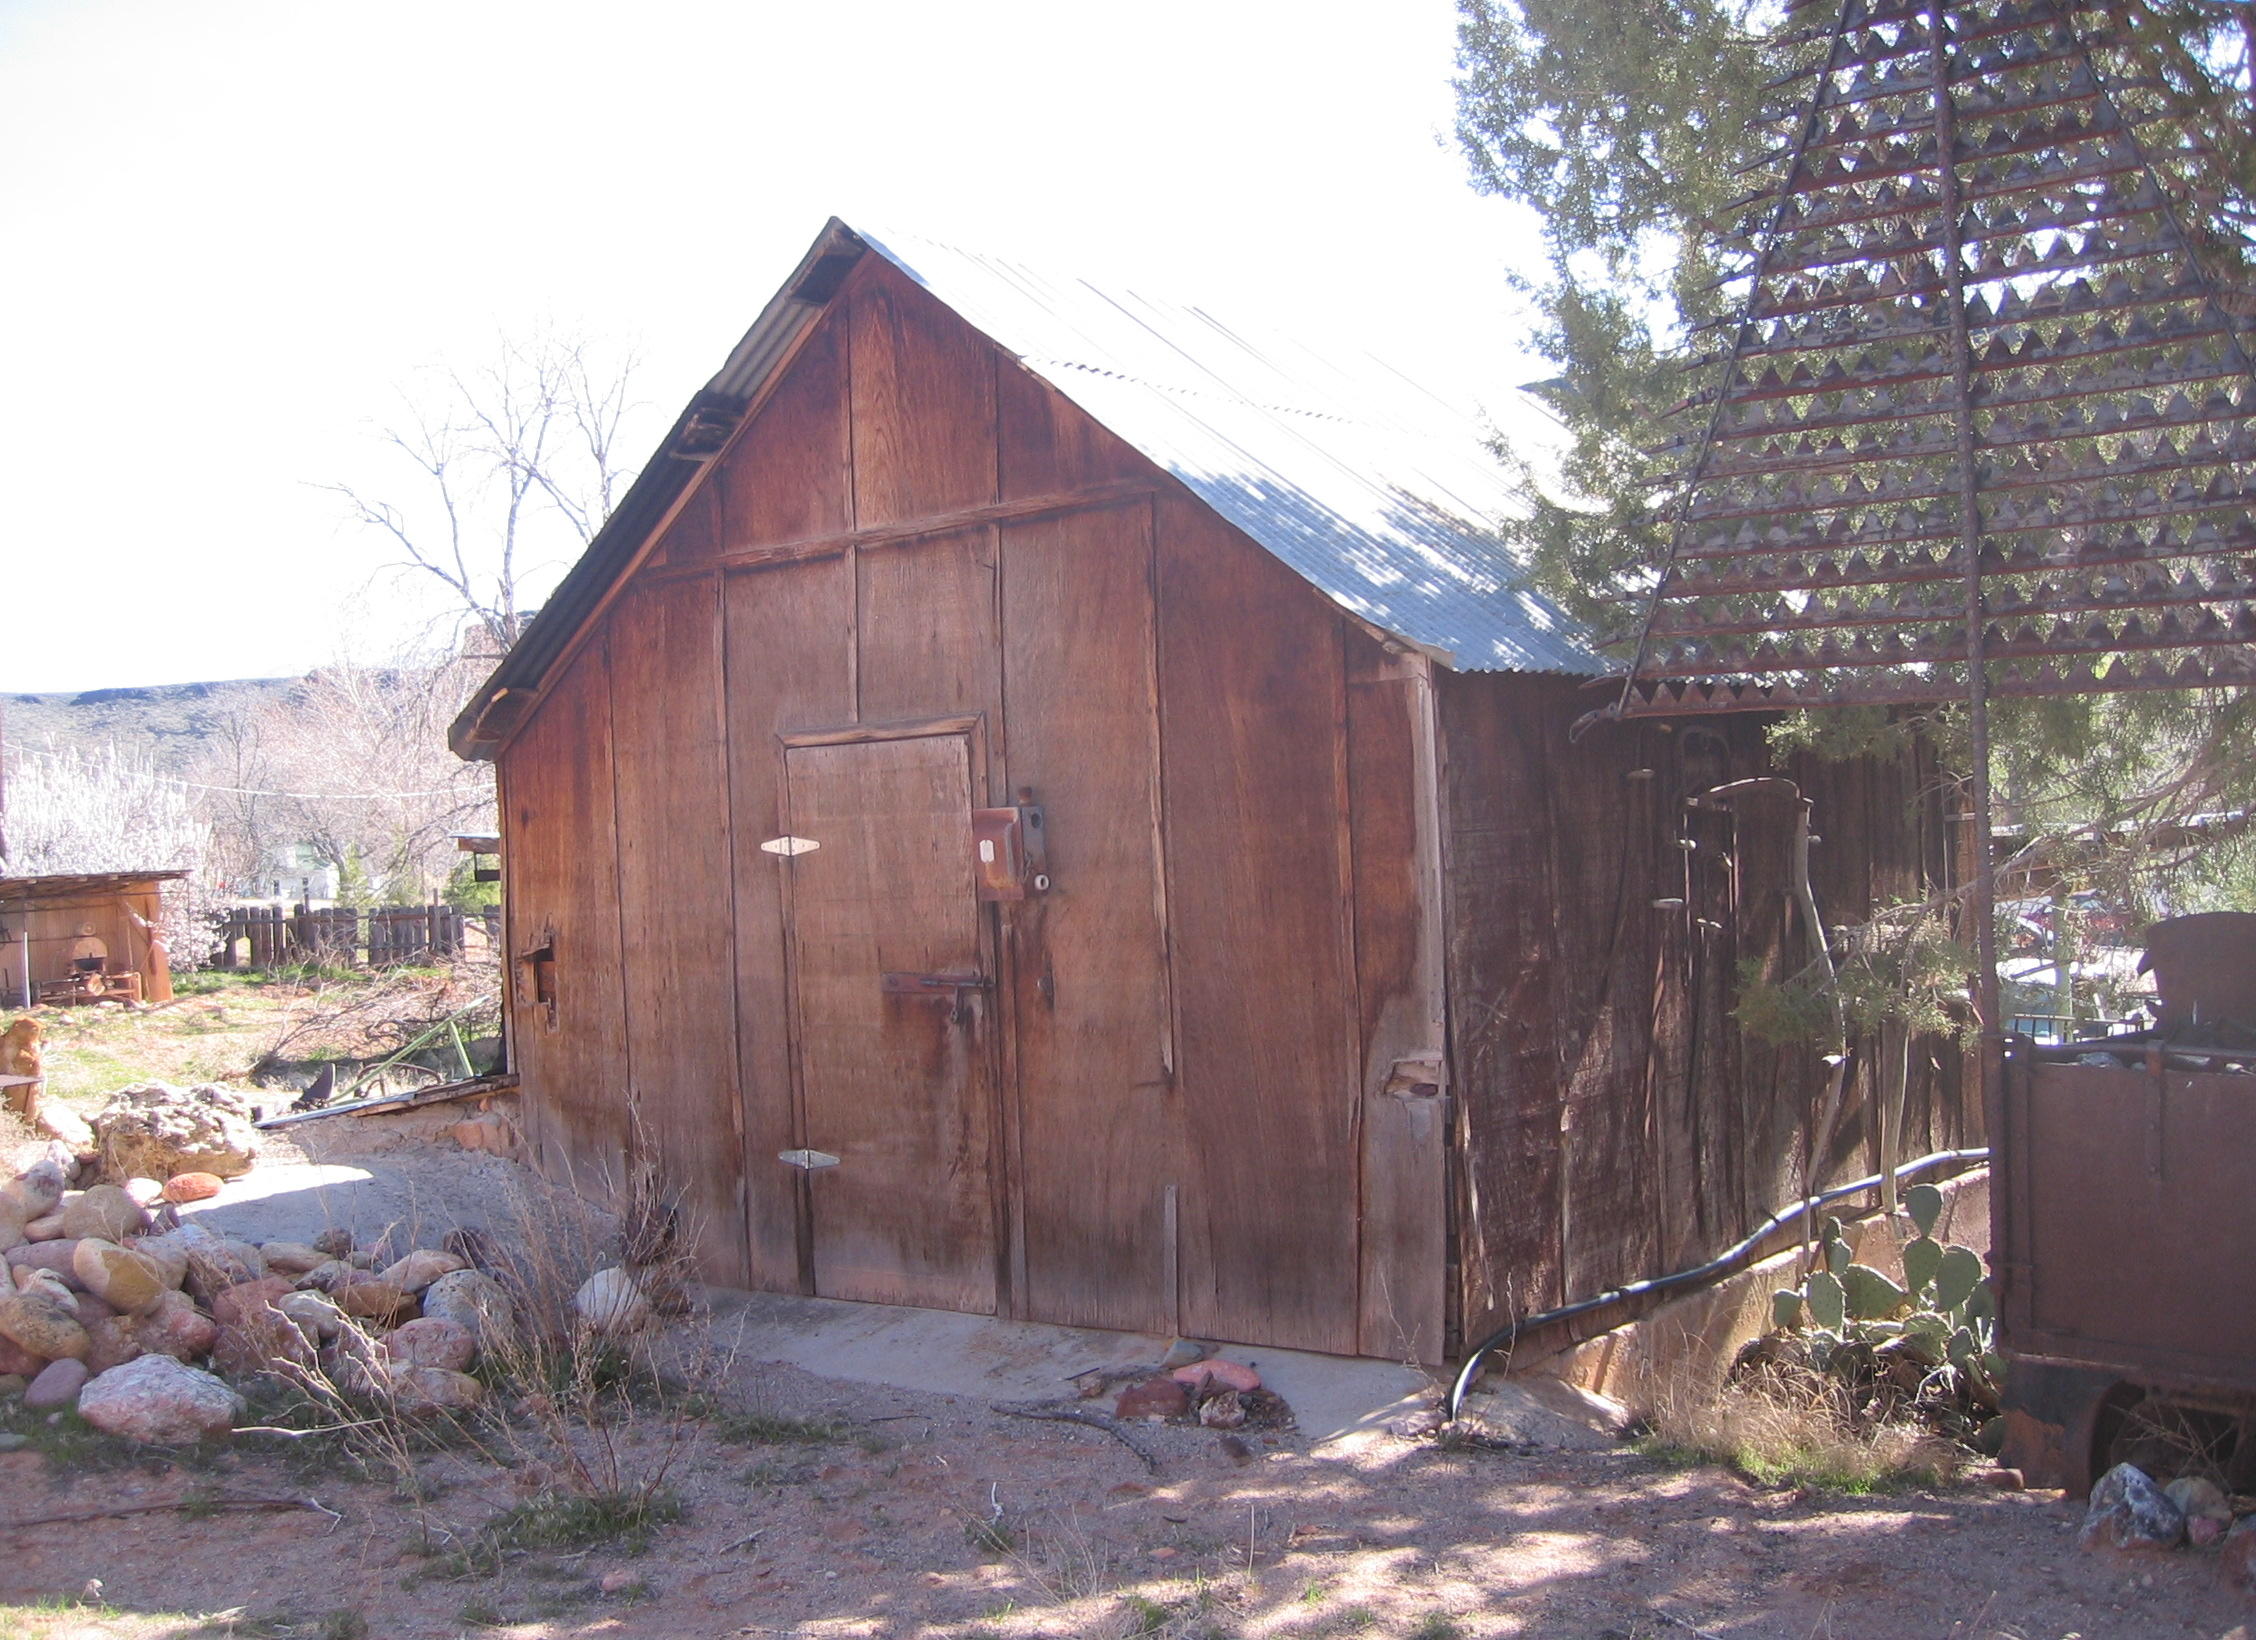 Shed at the Milt Holt home